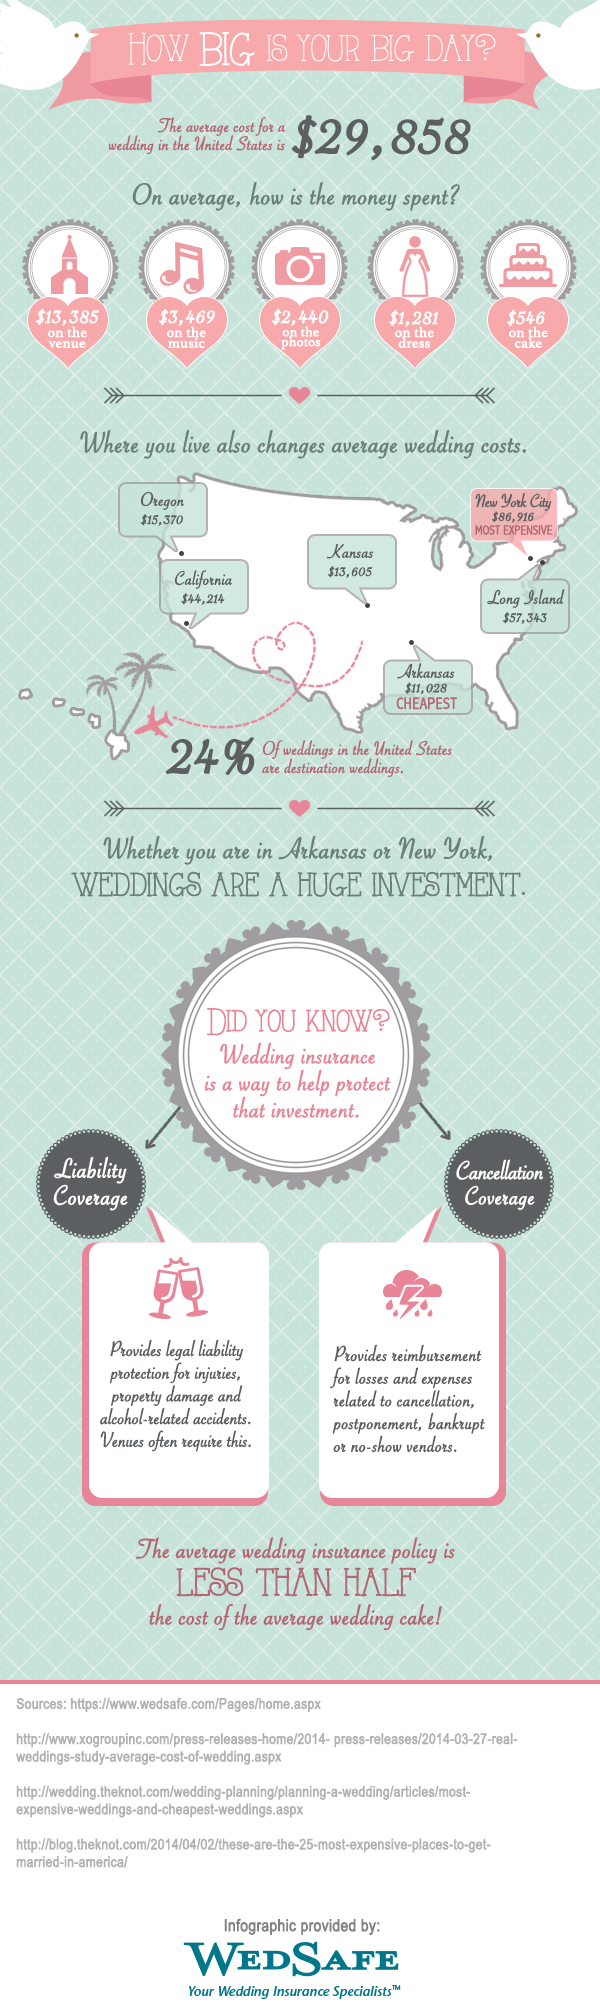 Wedding budget, Huge cost of weddings and how to protect it